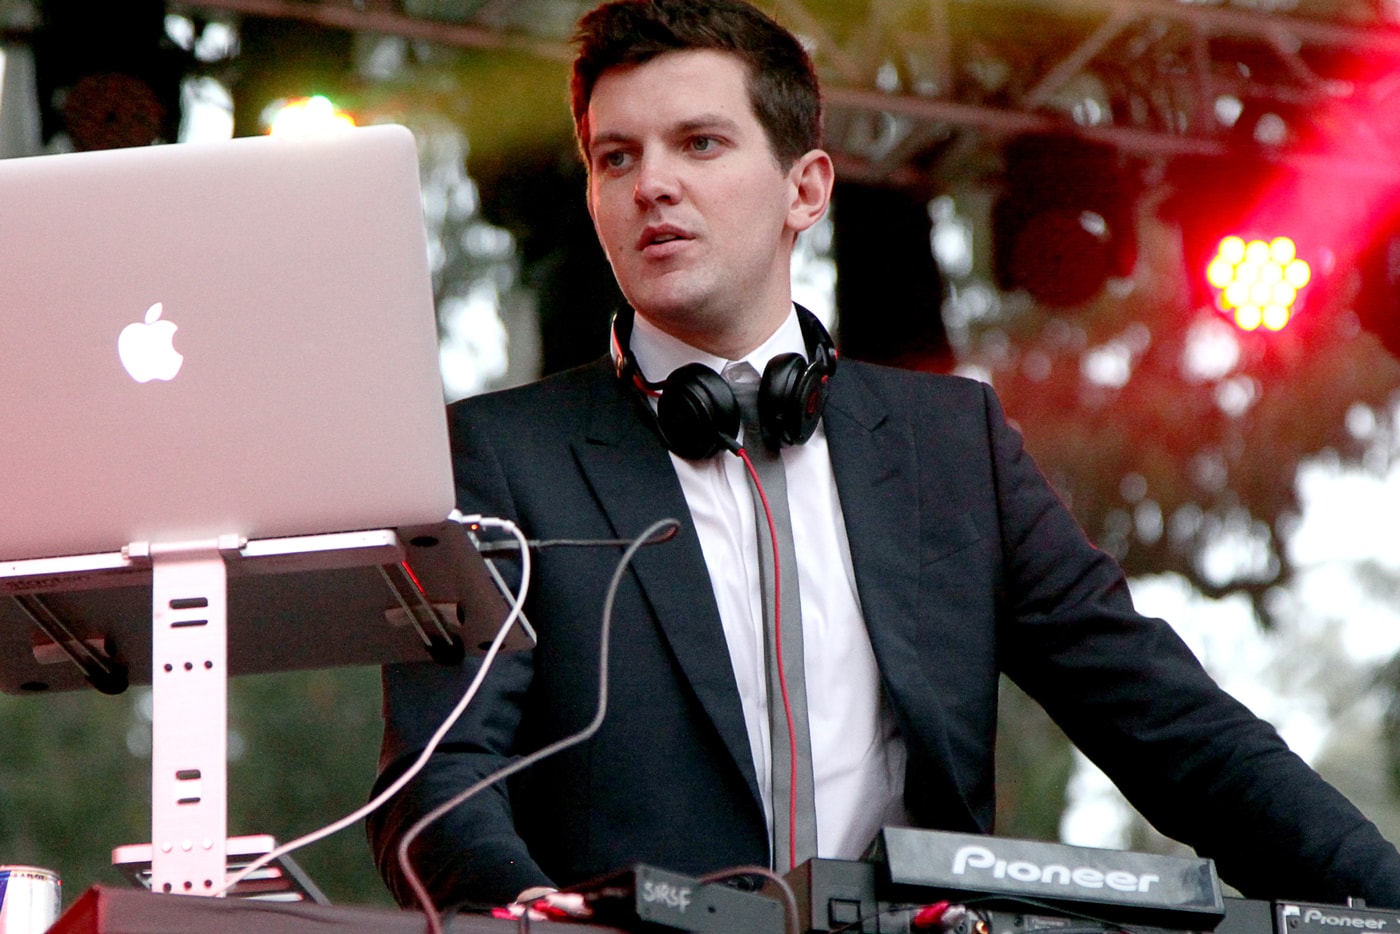 Skrillex & Dillon Francis Give New Life to GTA's "Red Lips"